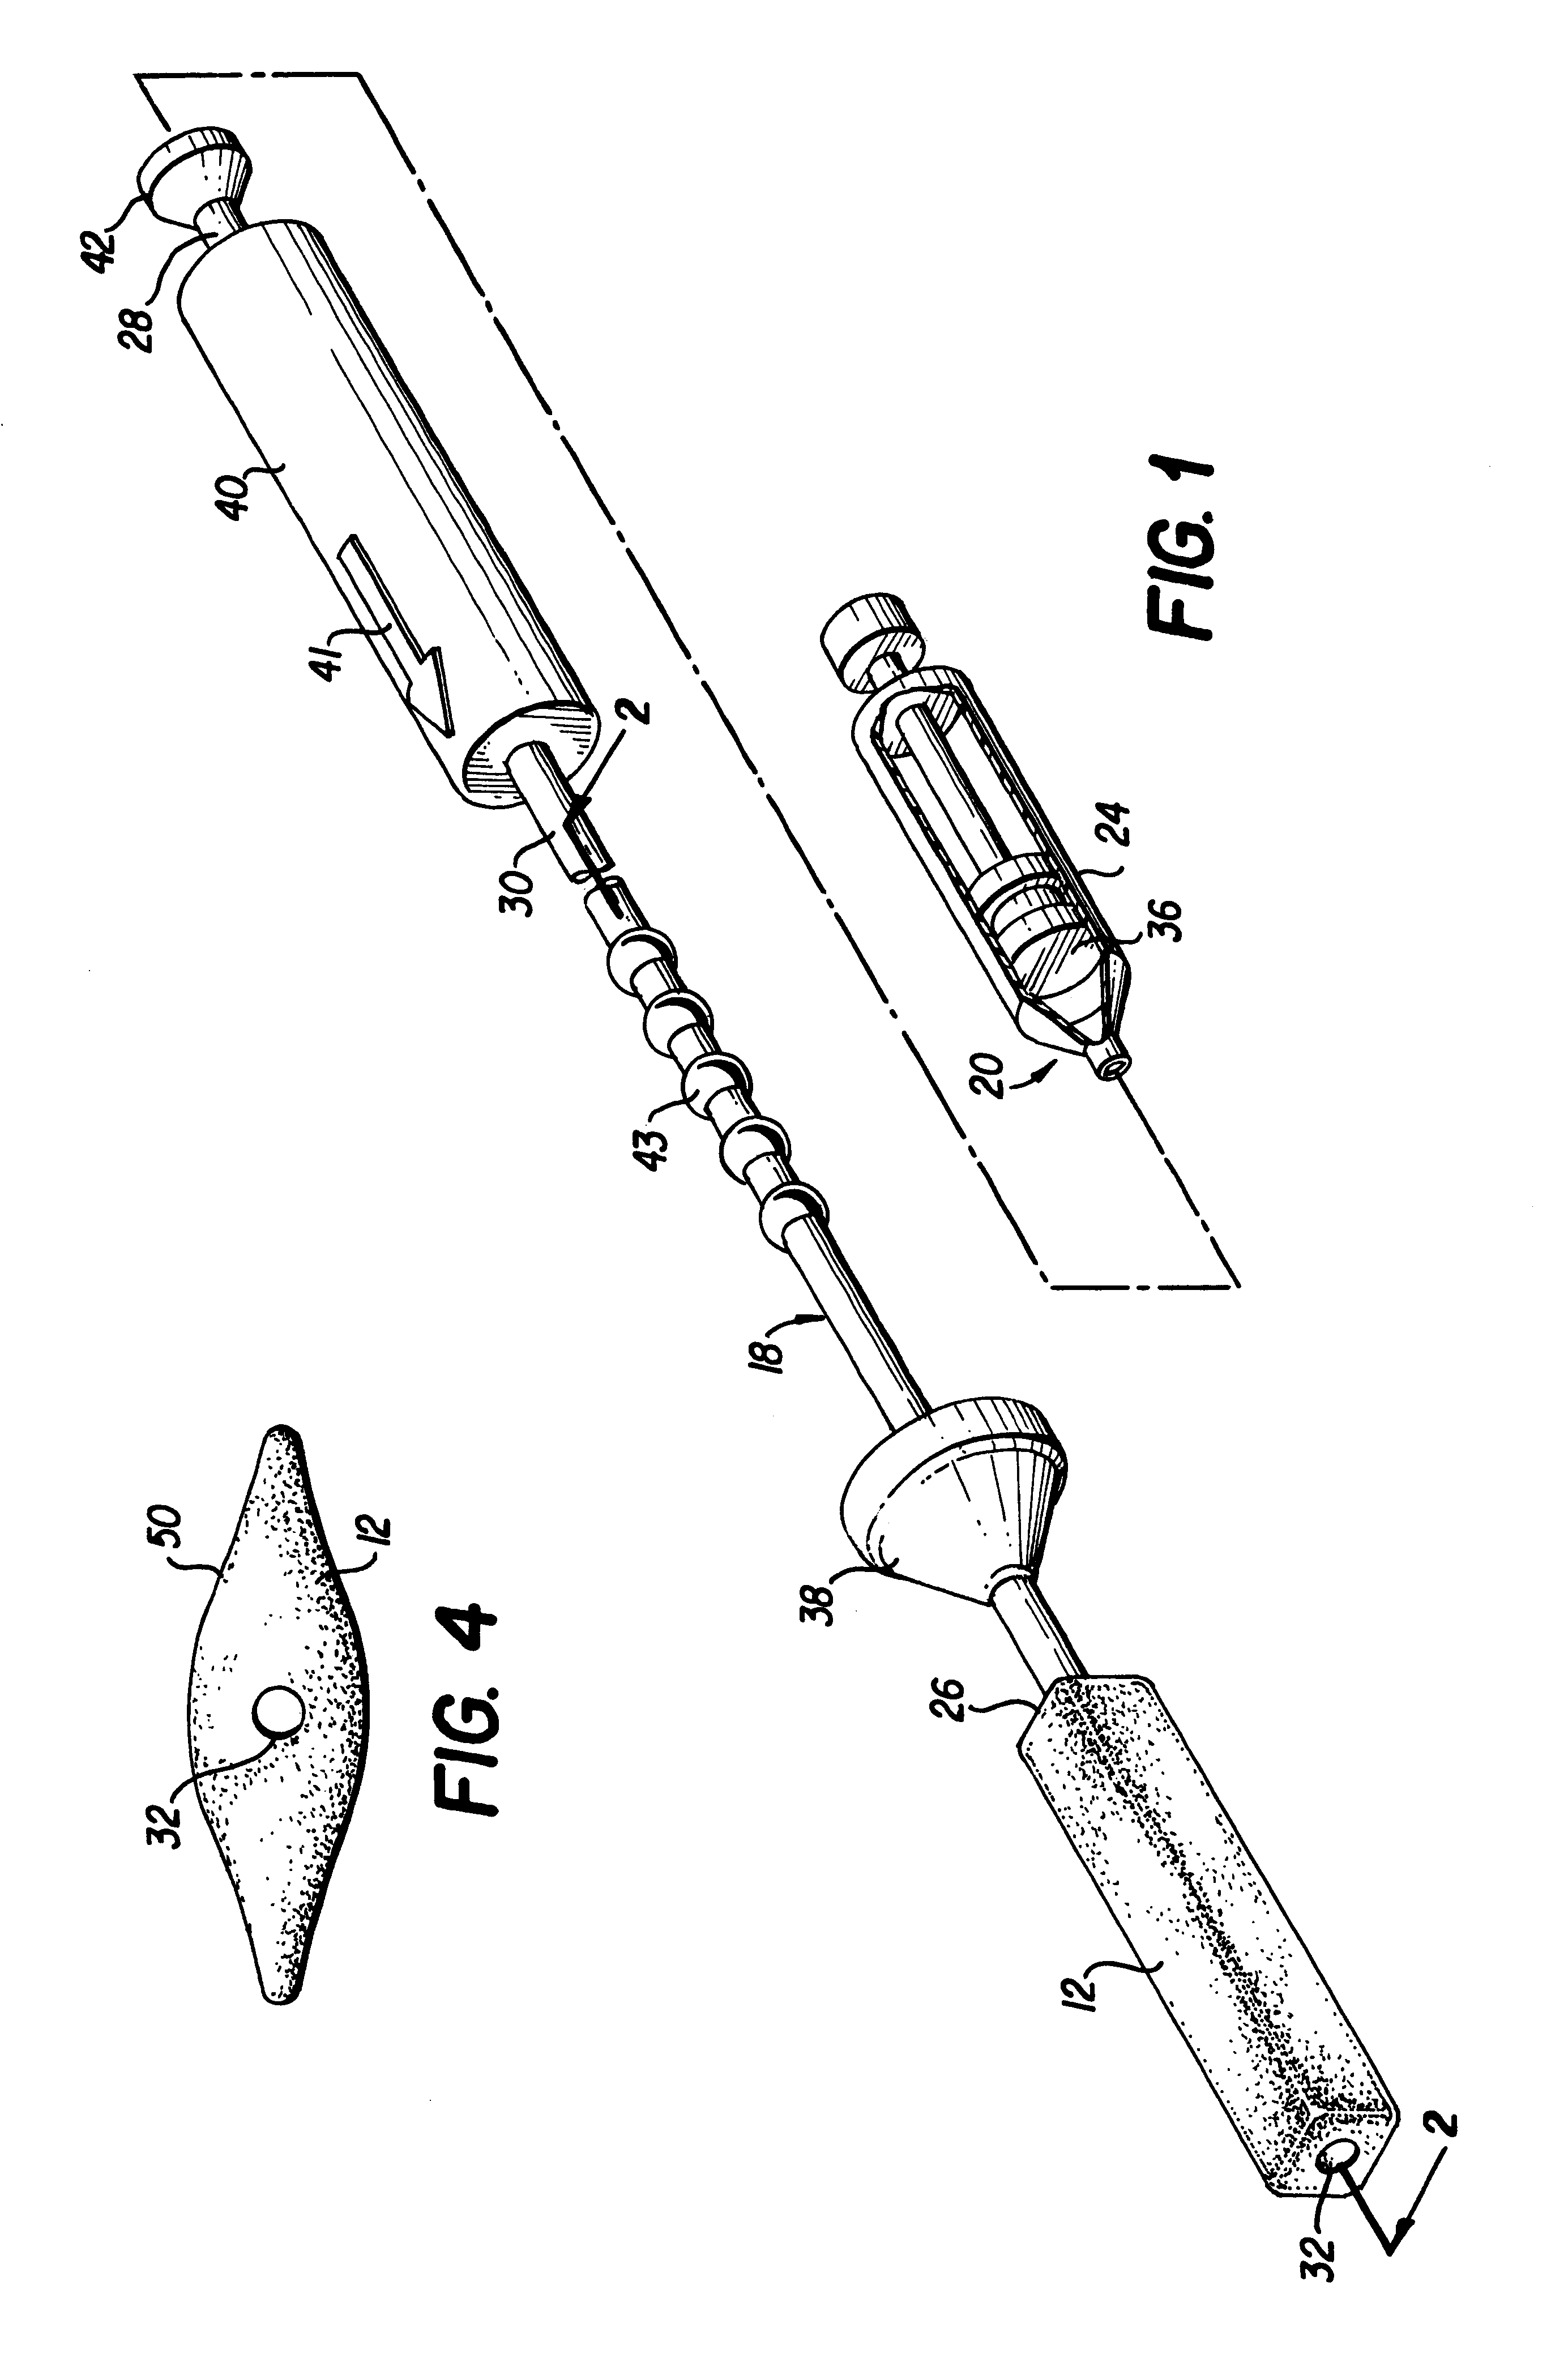 Apparatus and method for delivering and deploying an expandable body member in a uterine cavity